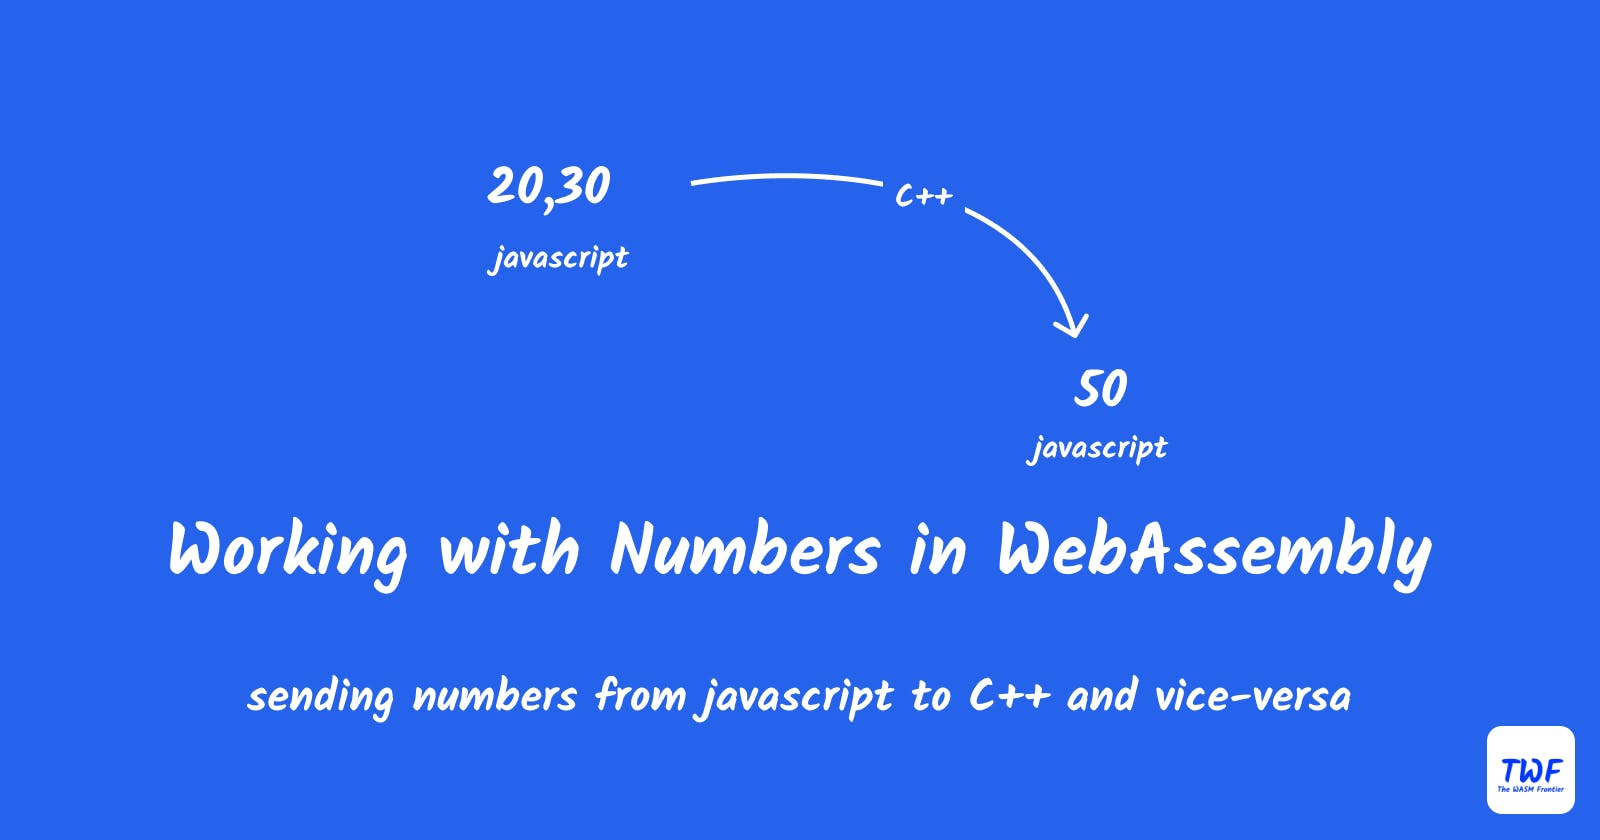 Working with Numbers in WebAssembly